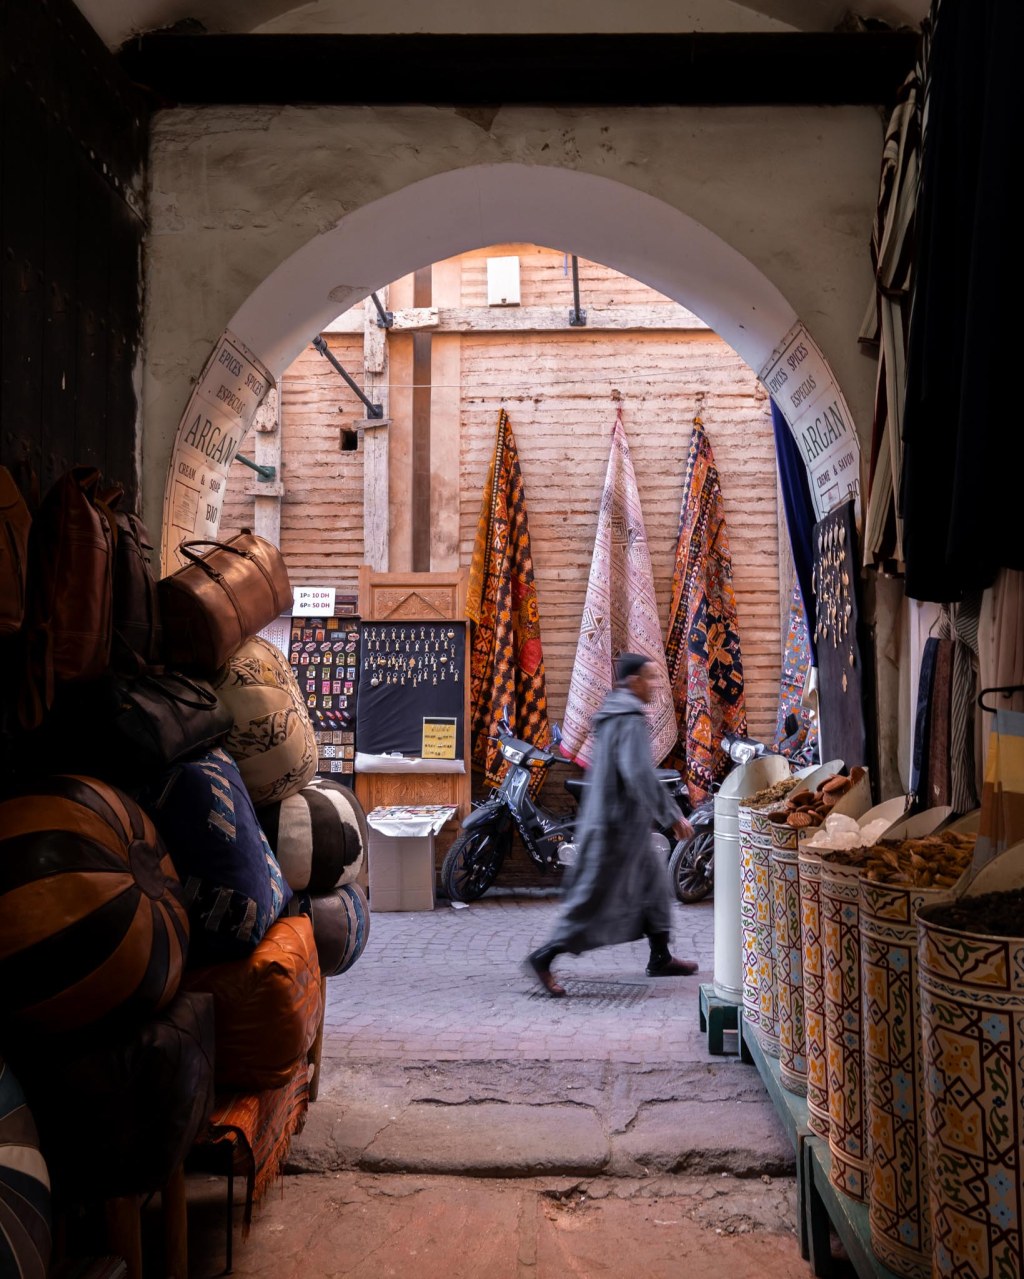 EVERYTHING YOU NEED TO KNOW BEFORE YOU TRAVEL TO MARRAKECH